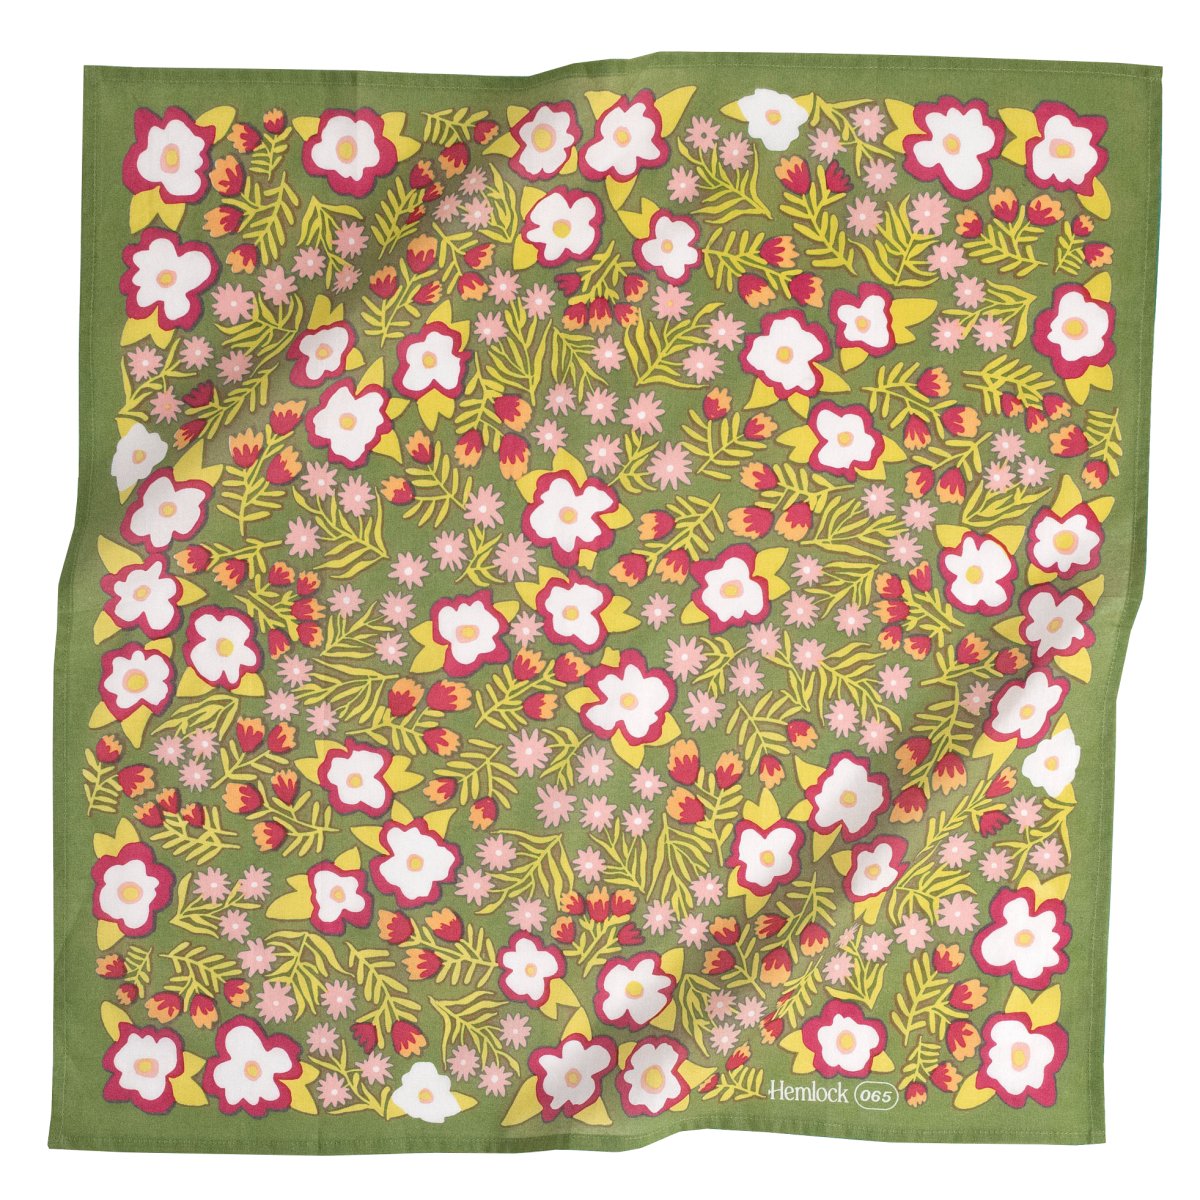 A green bandana with a ready, pink, white and yellow floral pattern. Designed by Hemlock Goods in Fulton, MO and screen printed by hand in India.